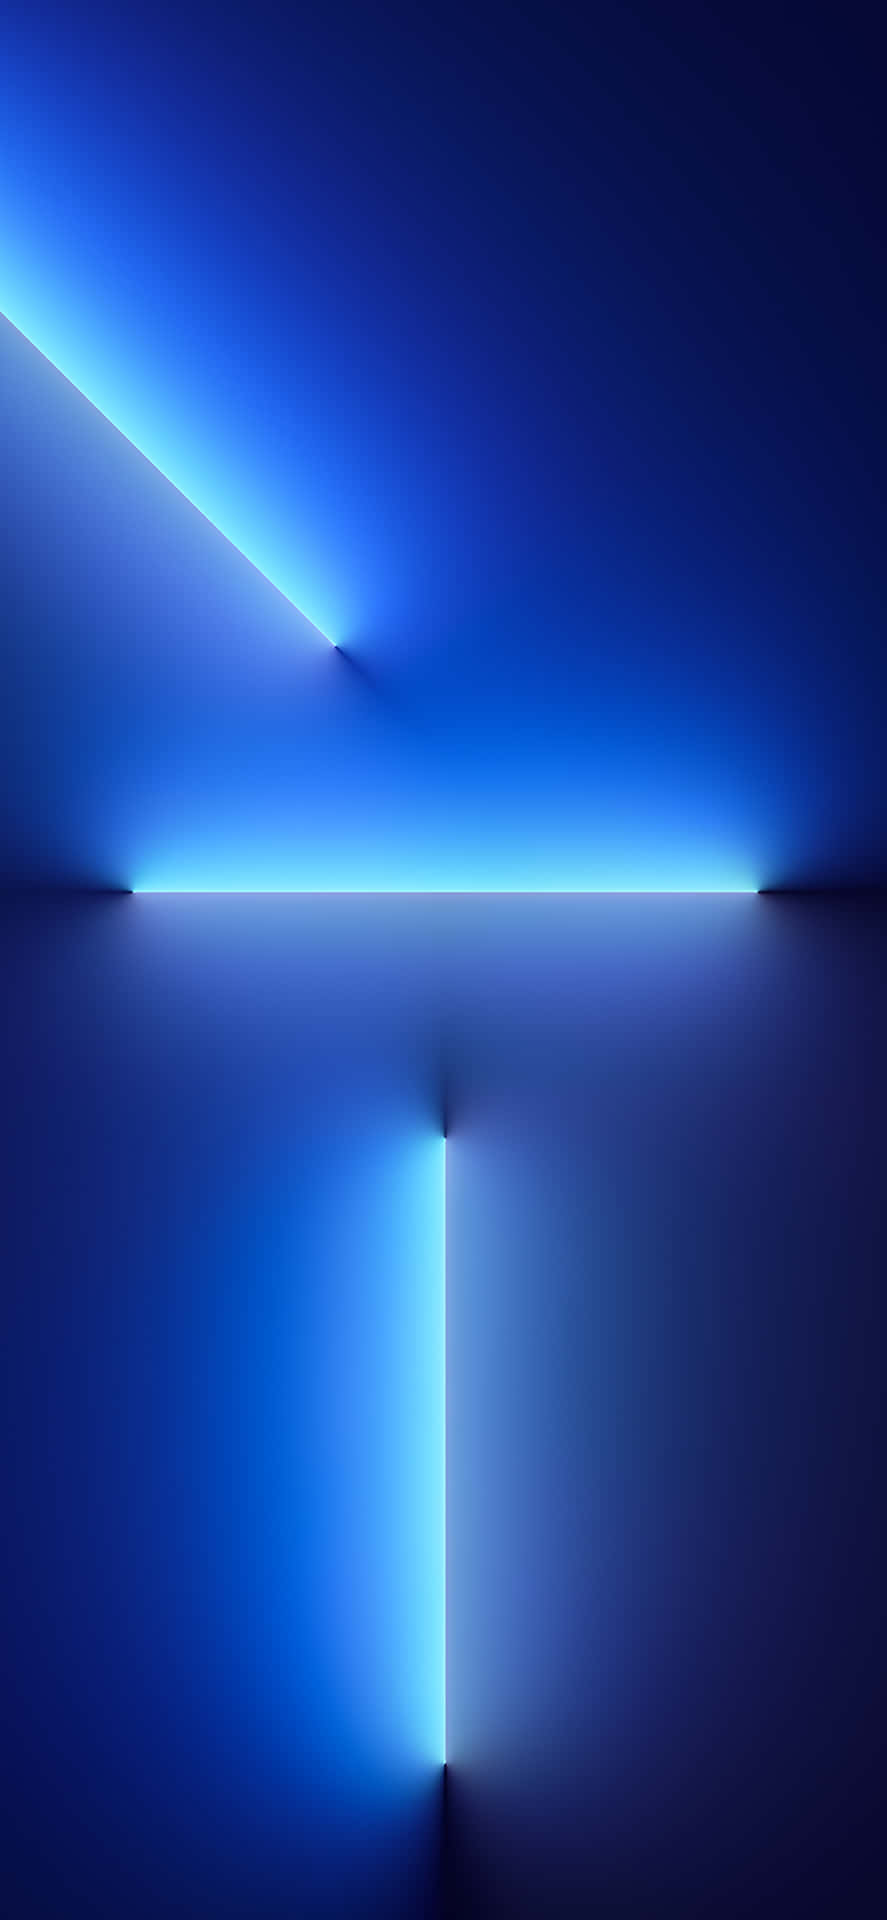 Get the latest Solid Blue iPhone Wallpaper